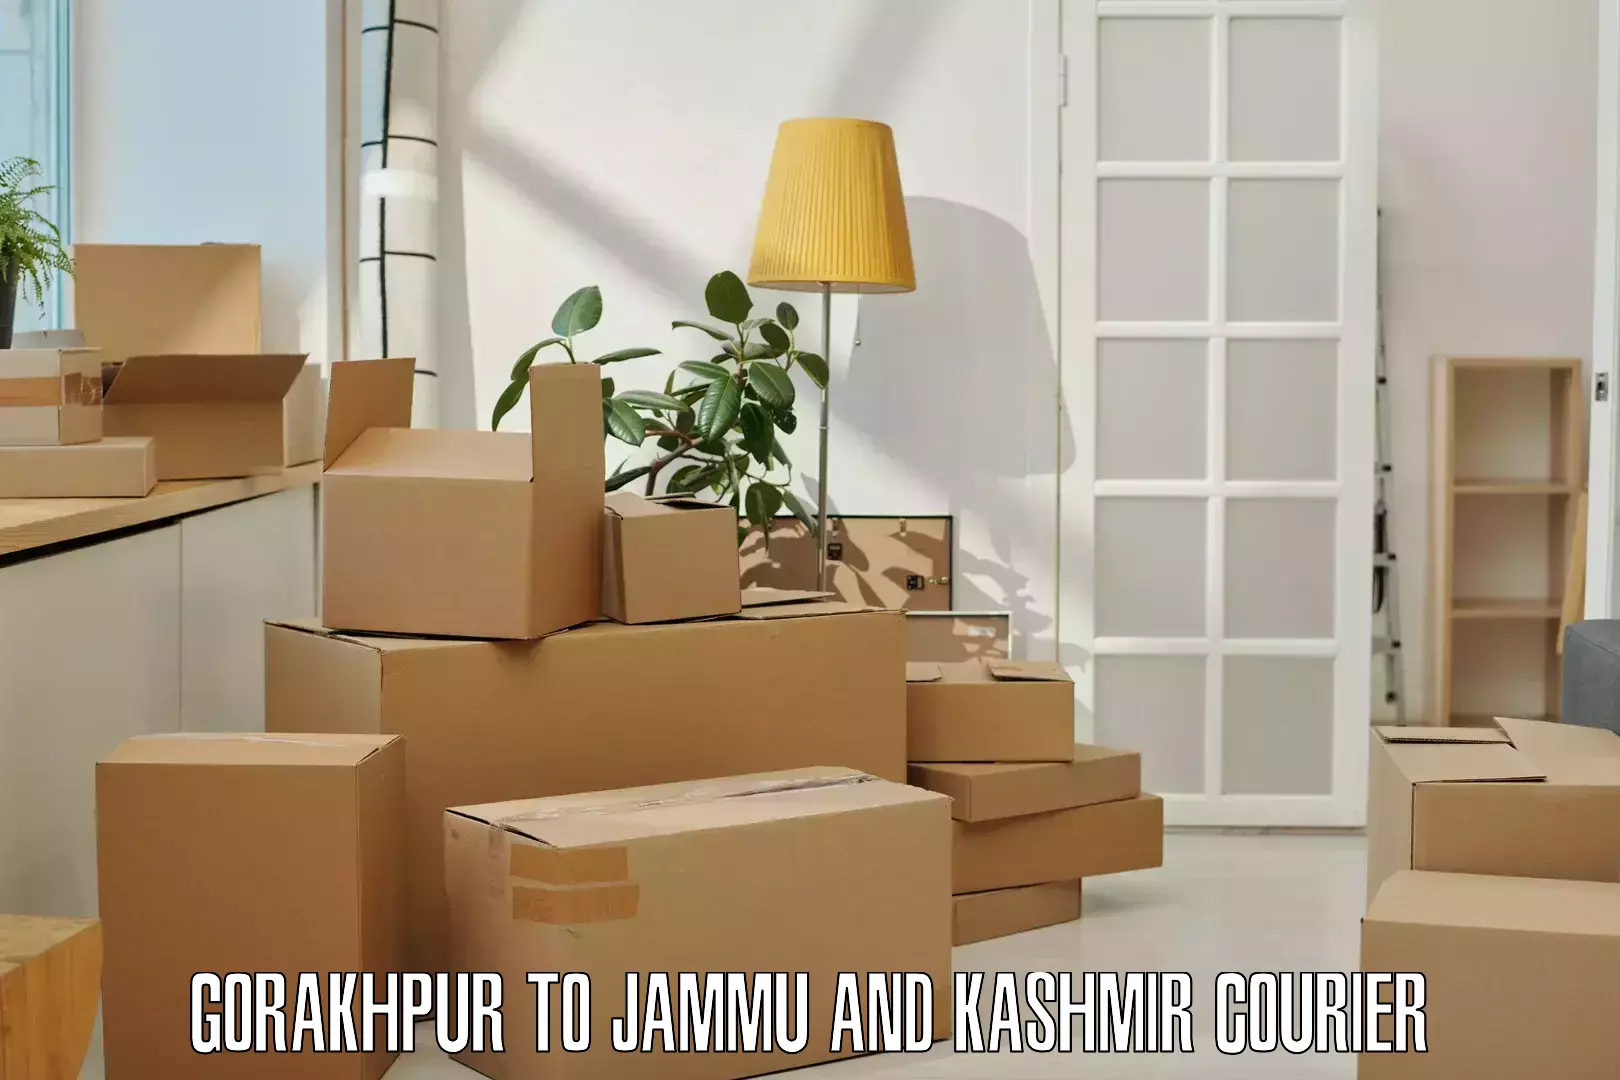 Easy access courier services in Gorakhpur to Anantnag